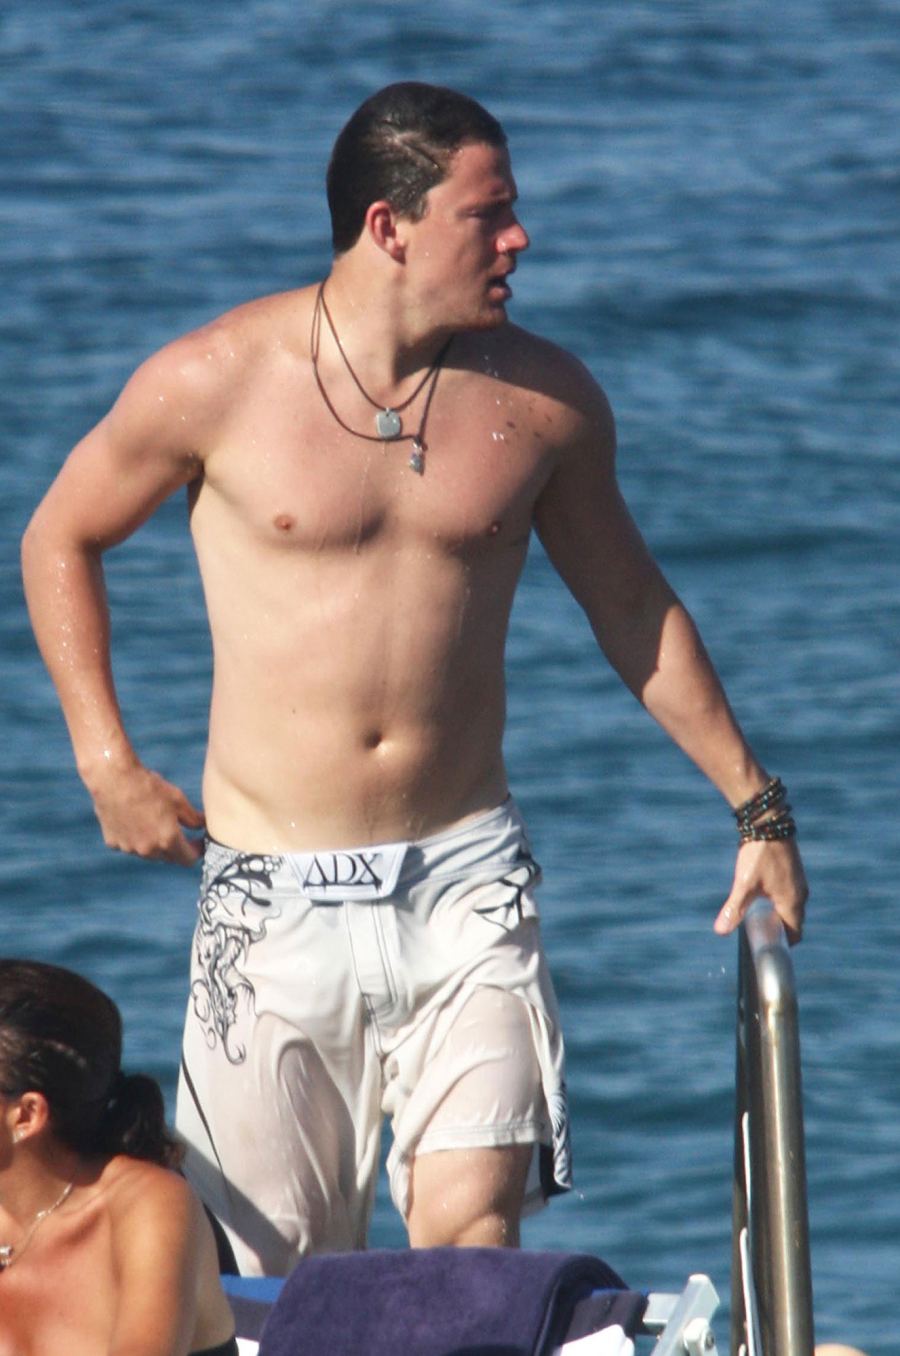 Shirtless Hunks- Hot Celebs and Their Insane Physiques Channing Tatum 2010